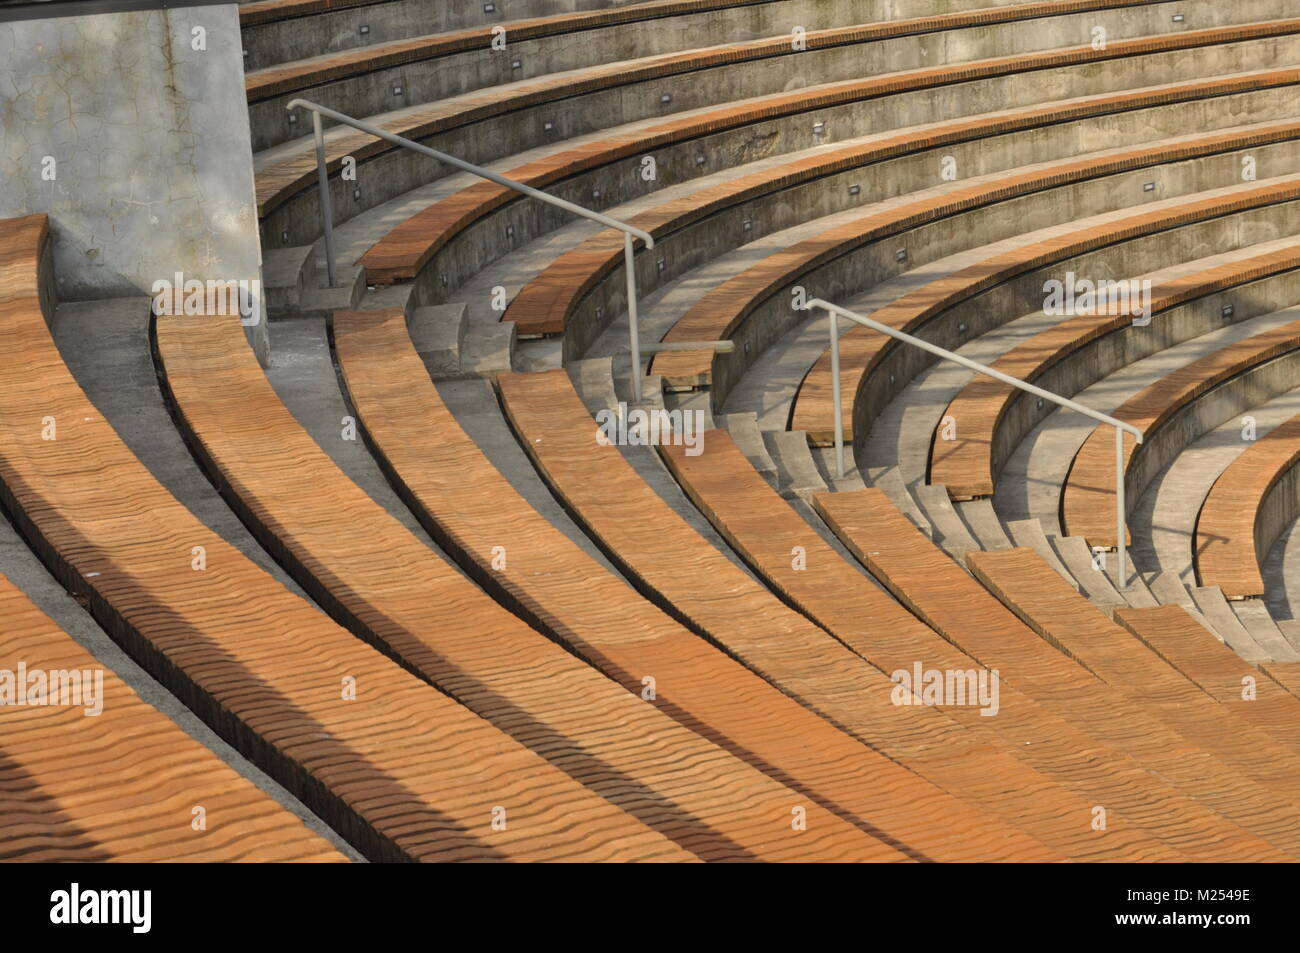 Amphitheater. Wooden benches set in stone circle. Stock Photo